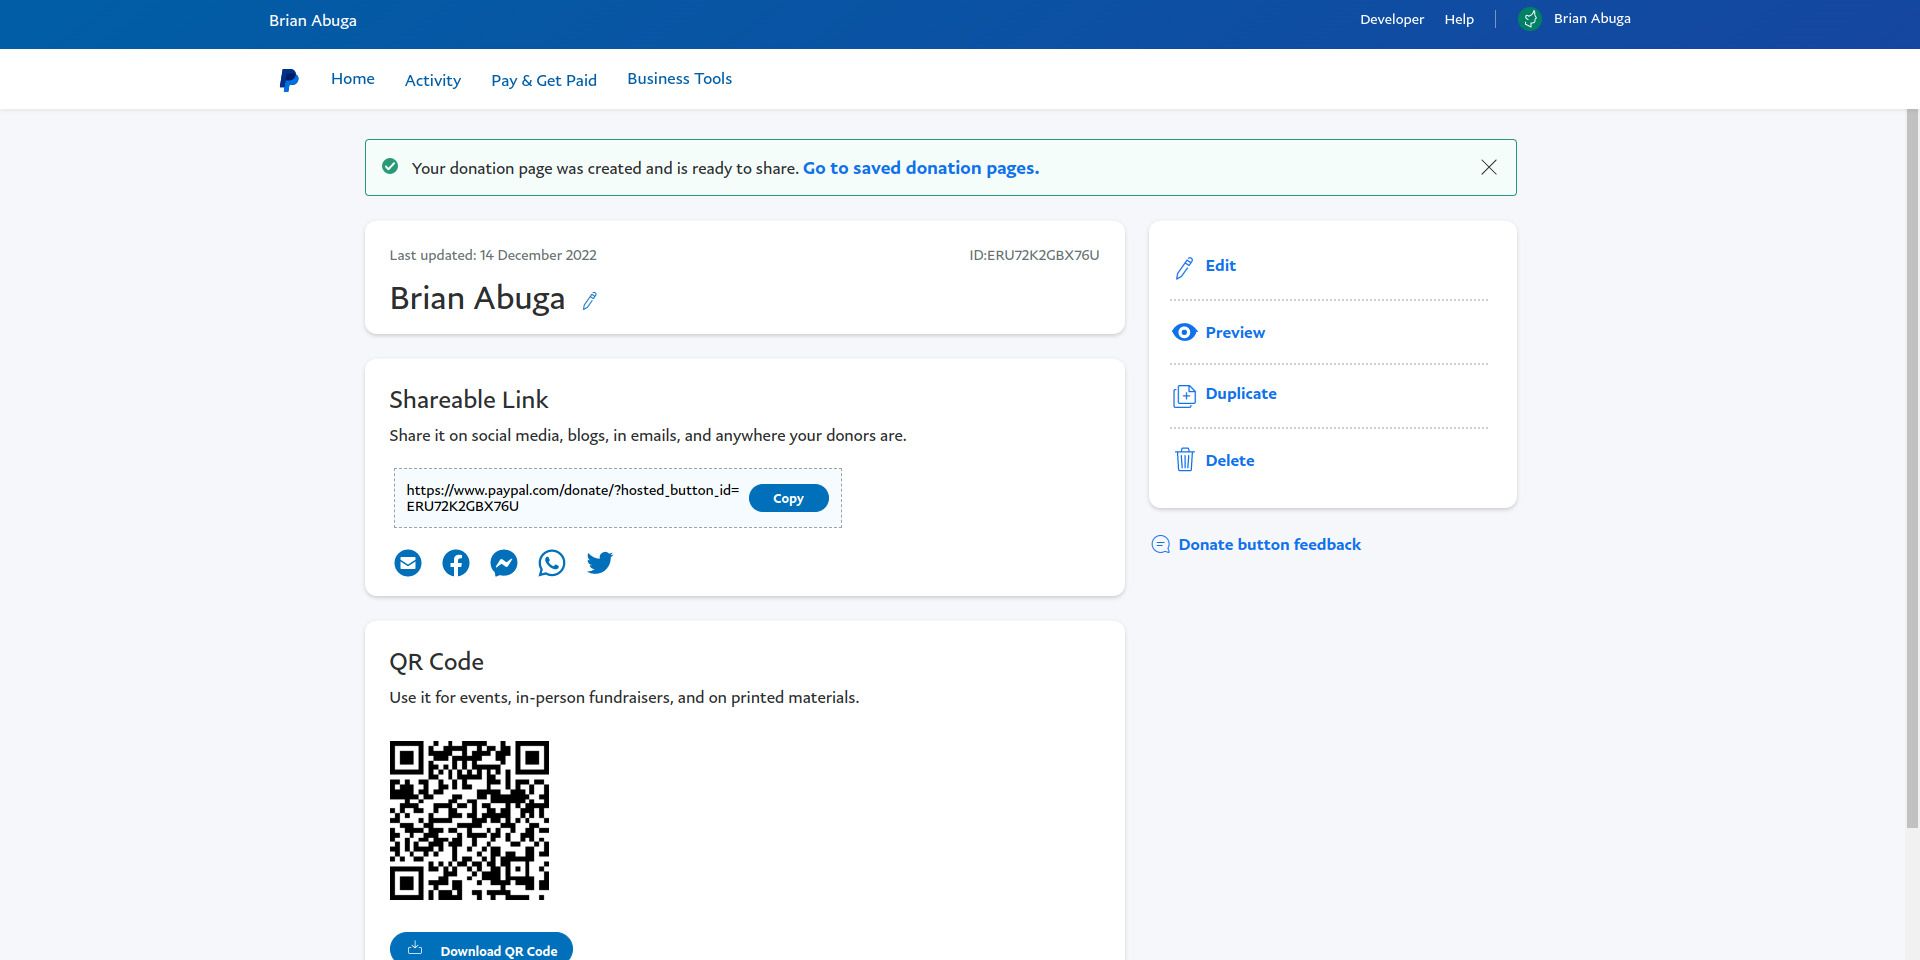 Ready PayPal donation page with QR code